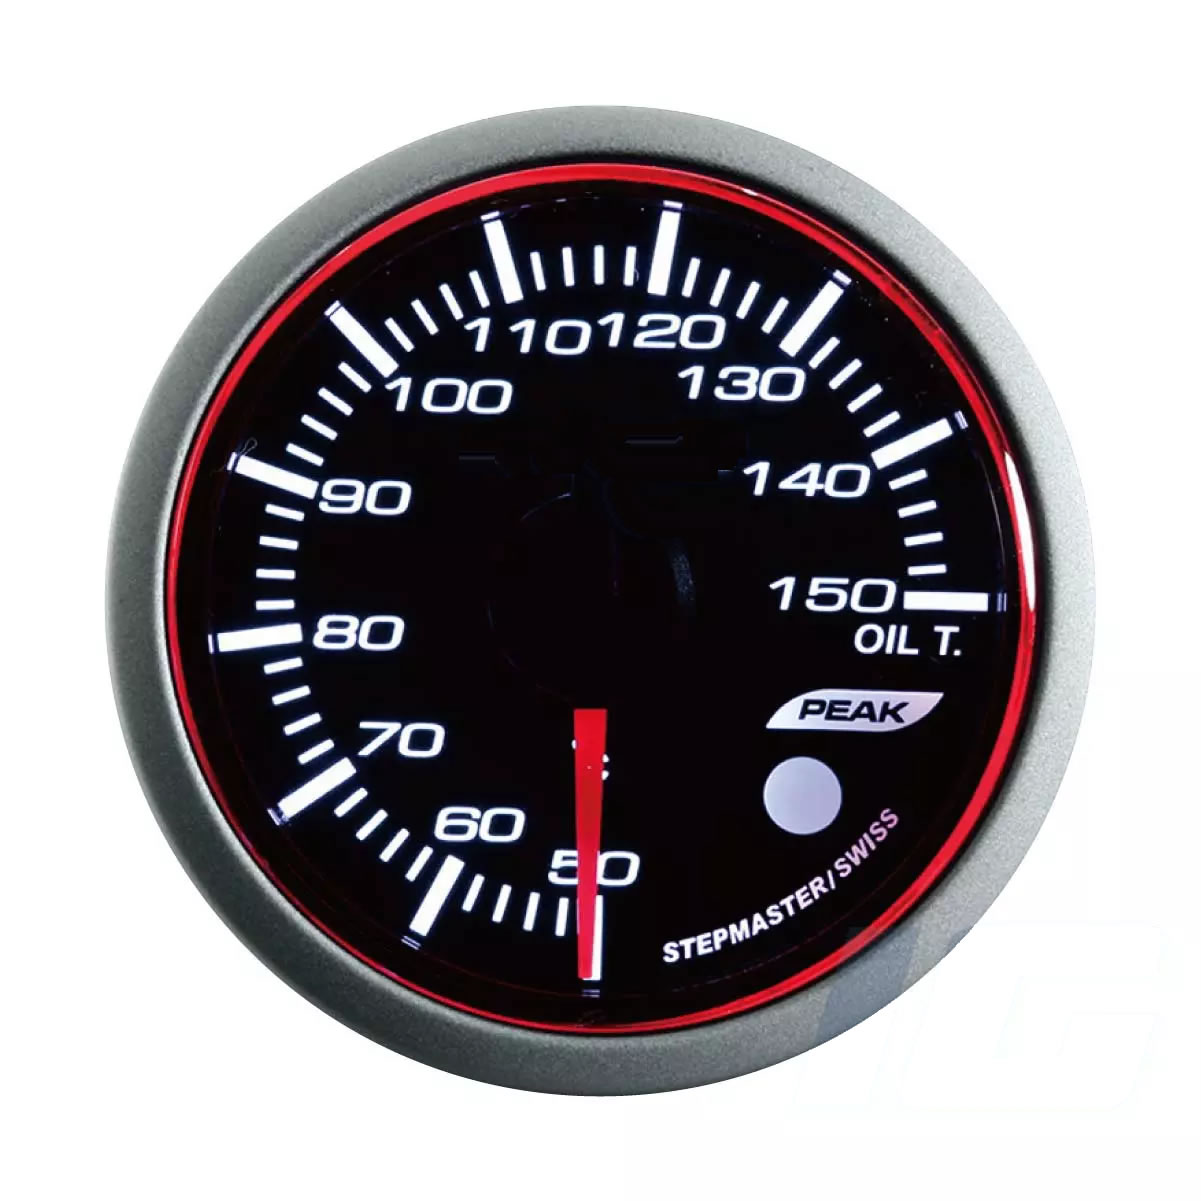 52mm White and Blue and Amber LED Performance Car Gauges - Oil Temp Gauge With Sensor and Warning and Peak For Your Sport Racing Car